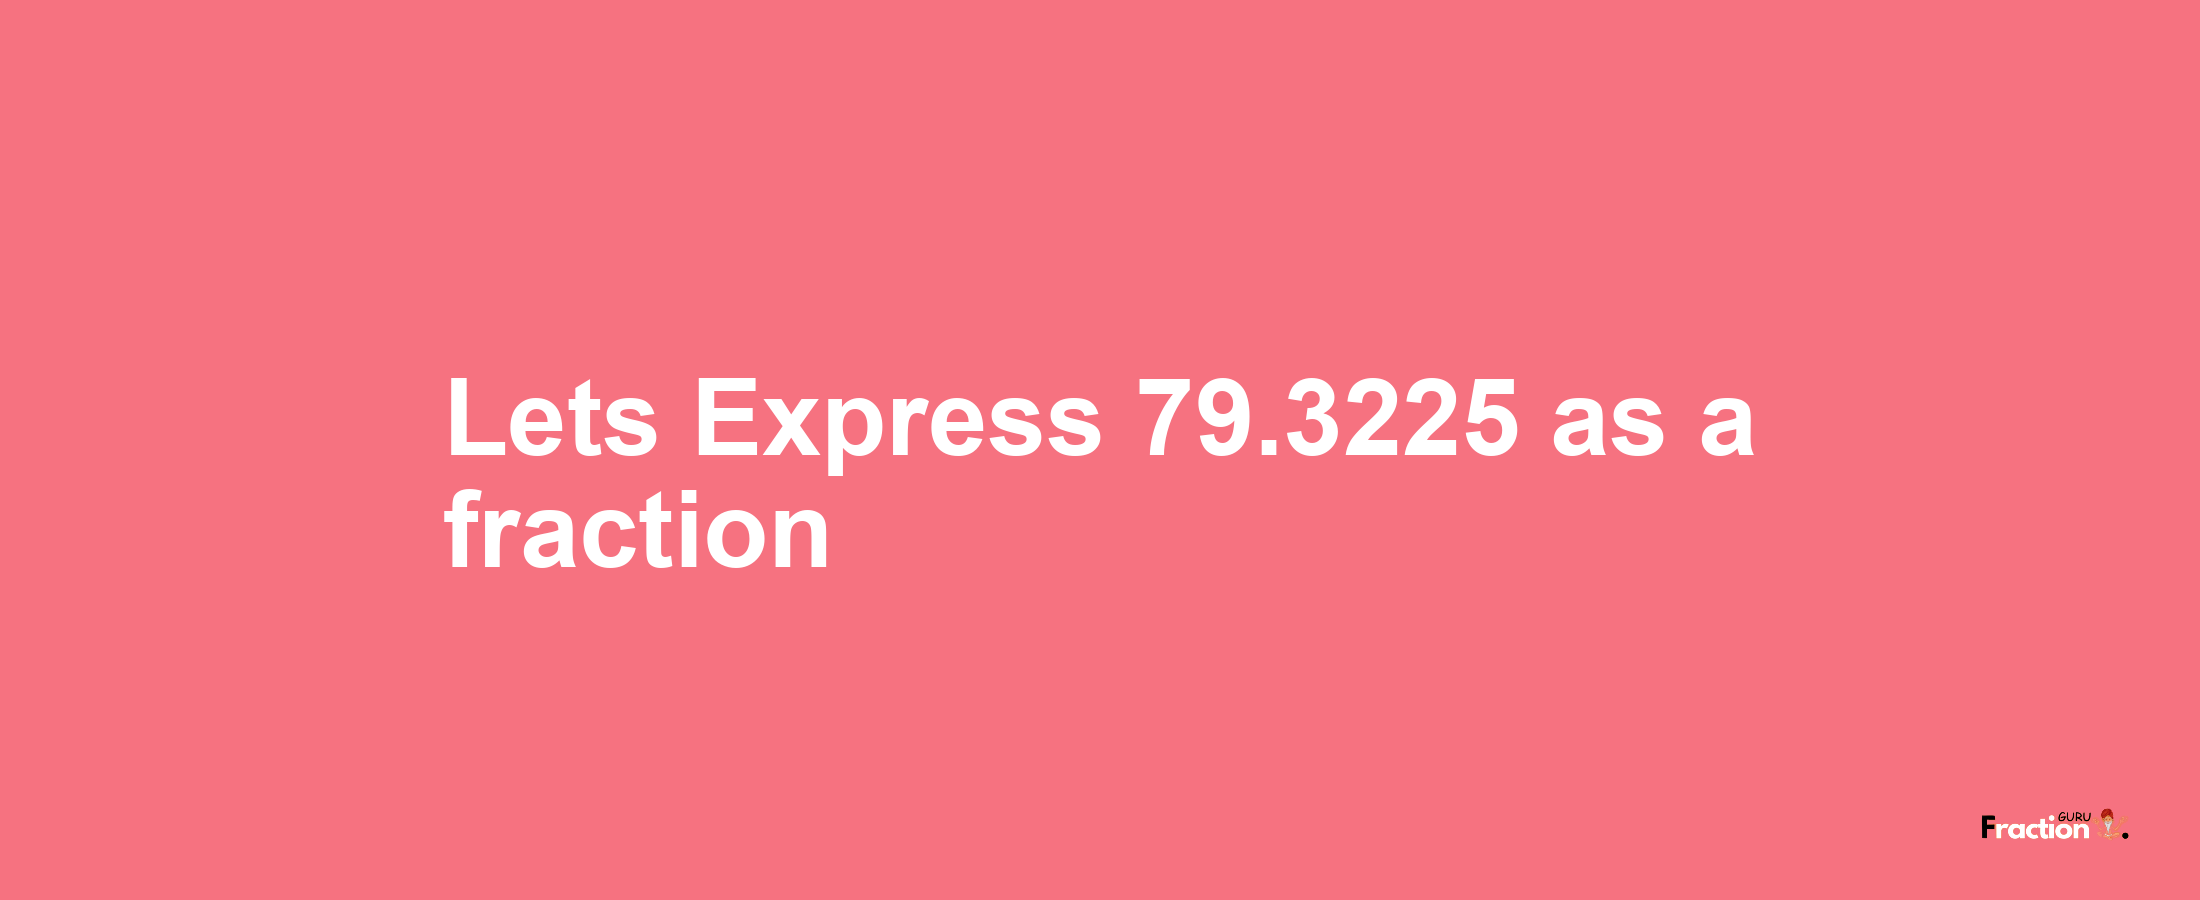 Lets Express 79.3225 as afraction